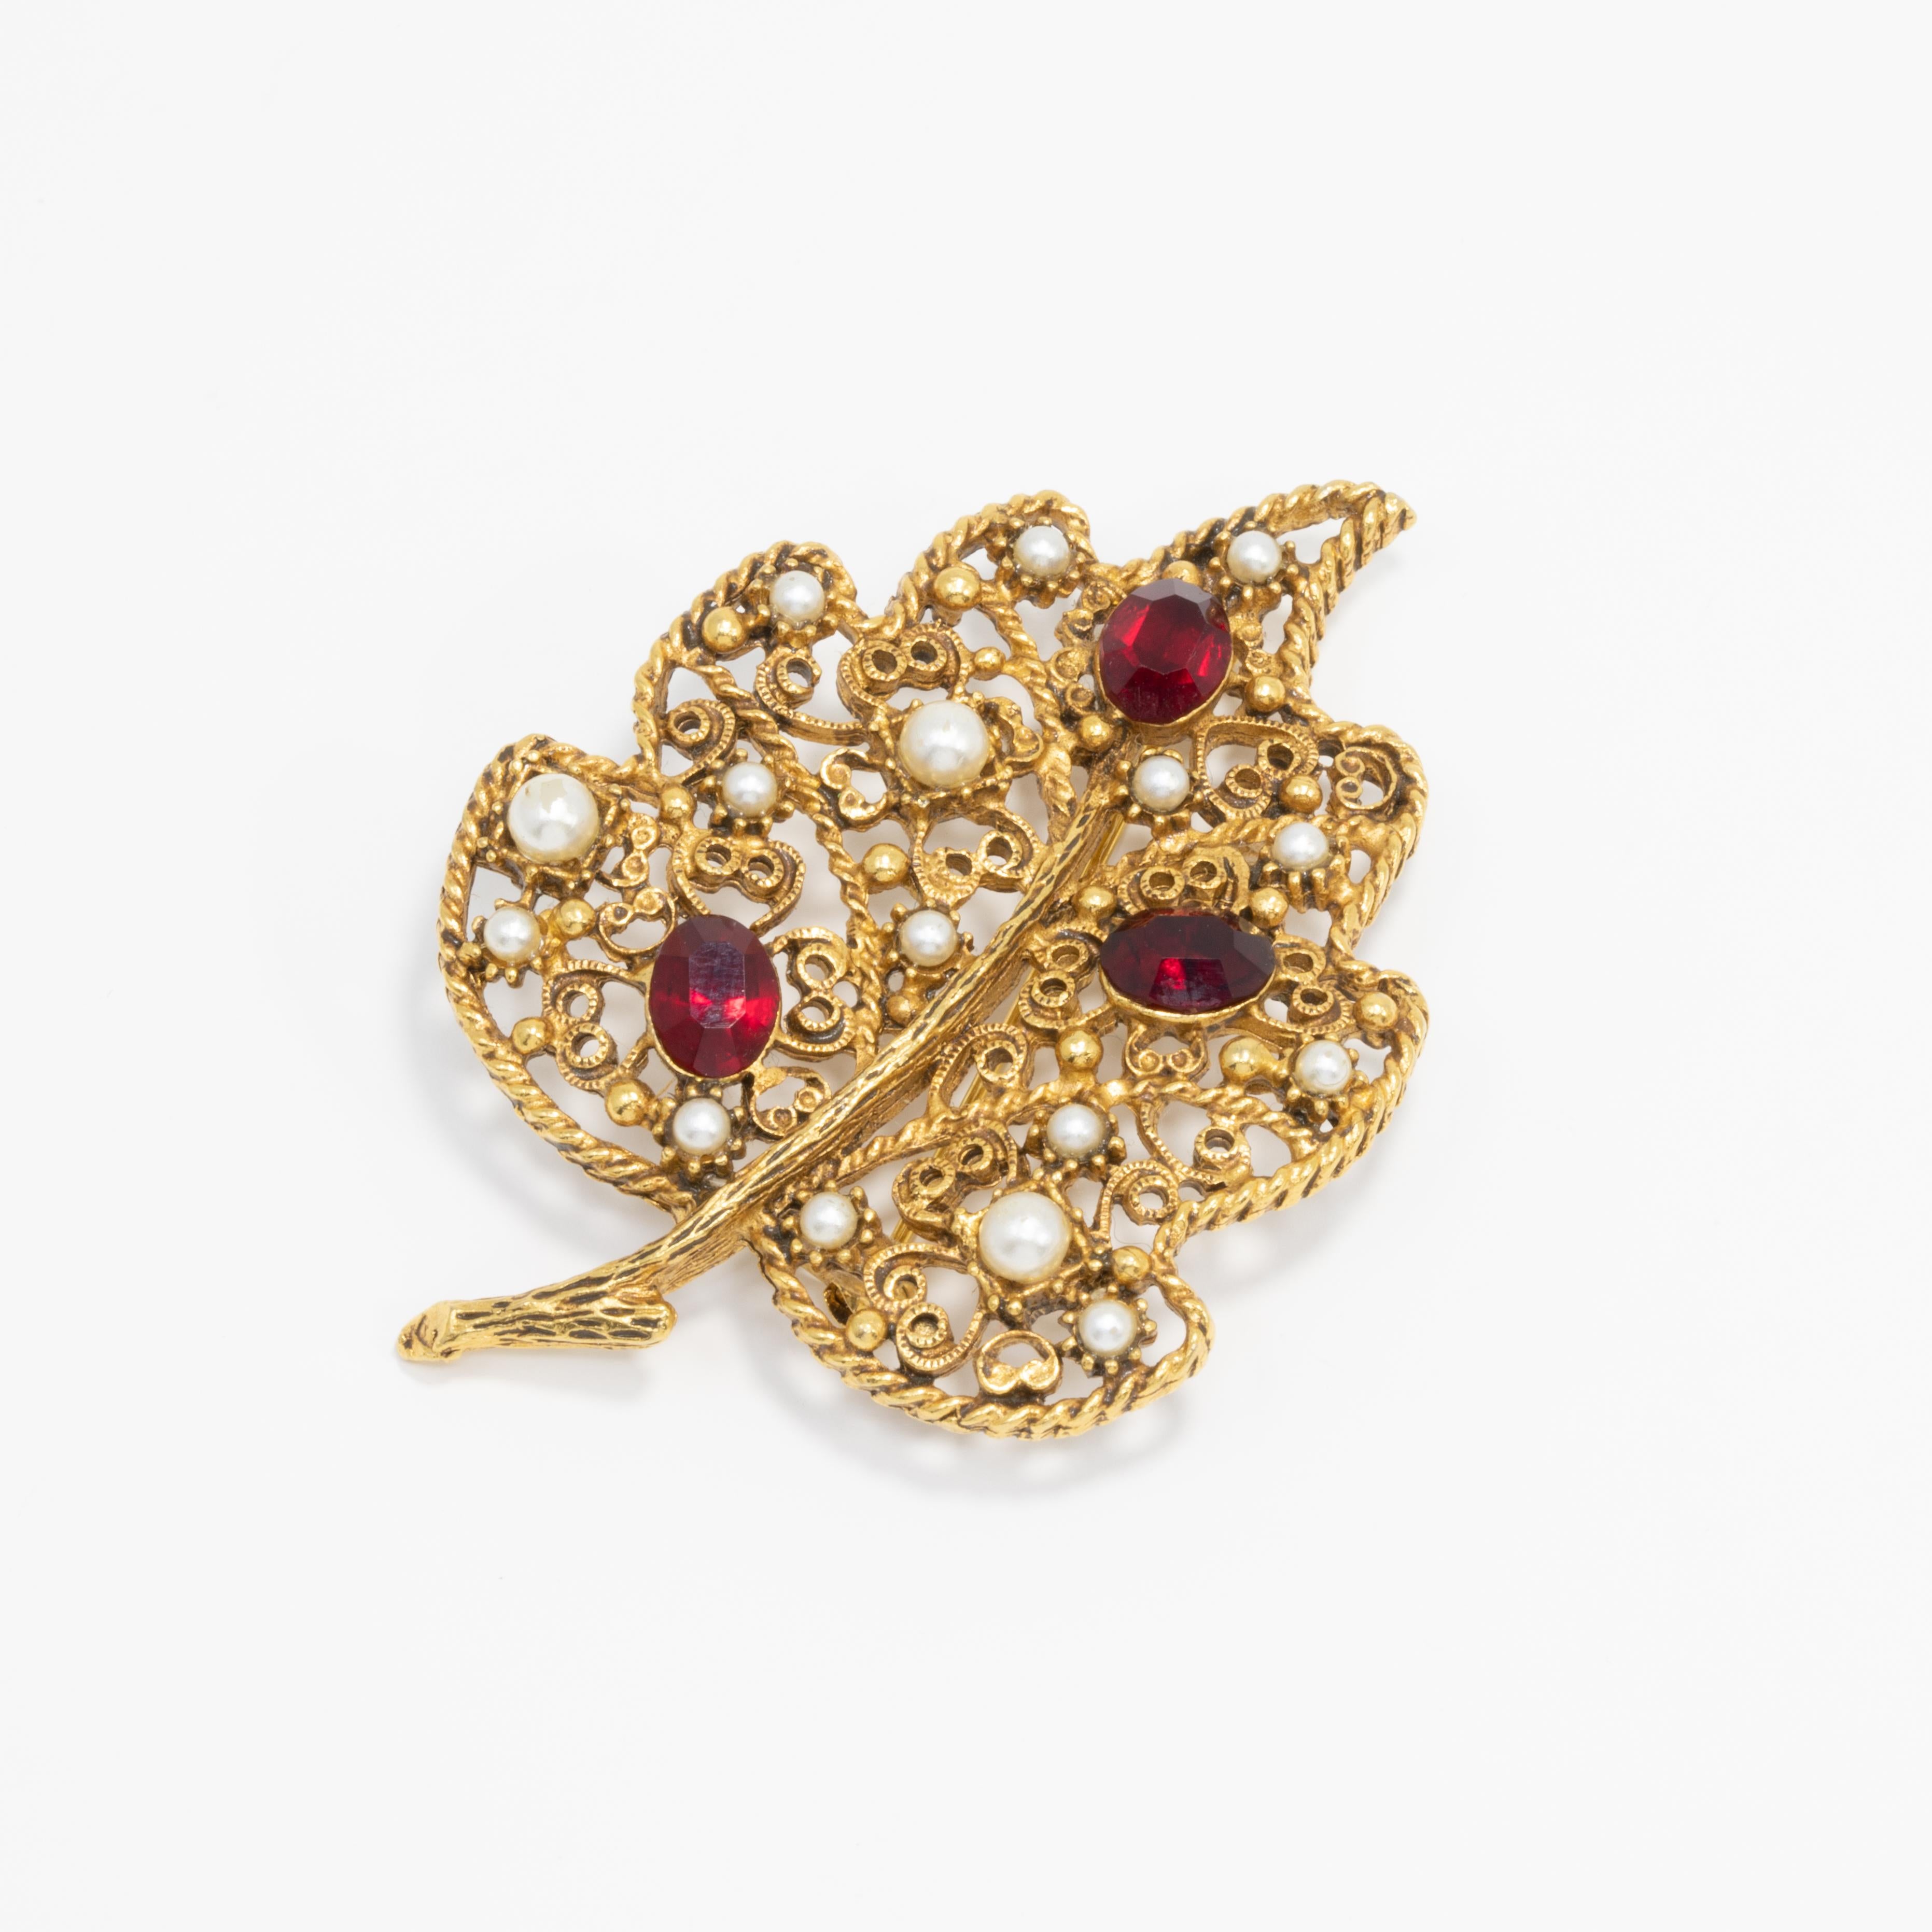 A regal-looking pin brooch by Florenza. This open filigree leaf is decorated with ruby-red crystals and faux pearls.

Gold-tone. Circa mid 1900s.

Hallmarks: Florenza